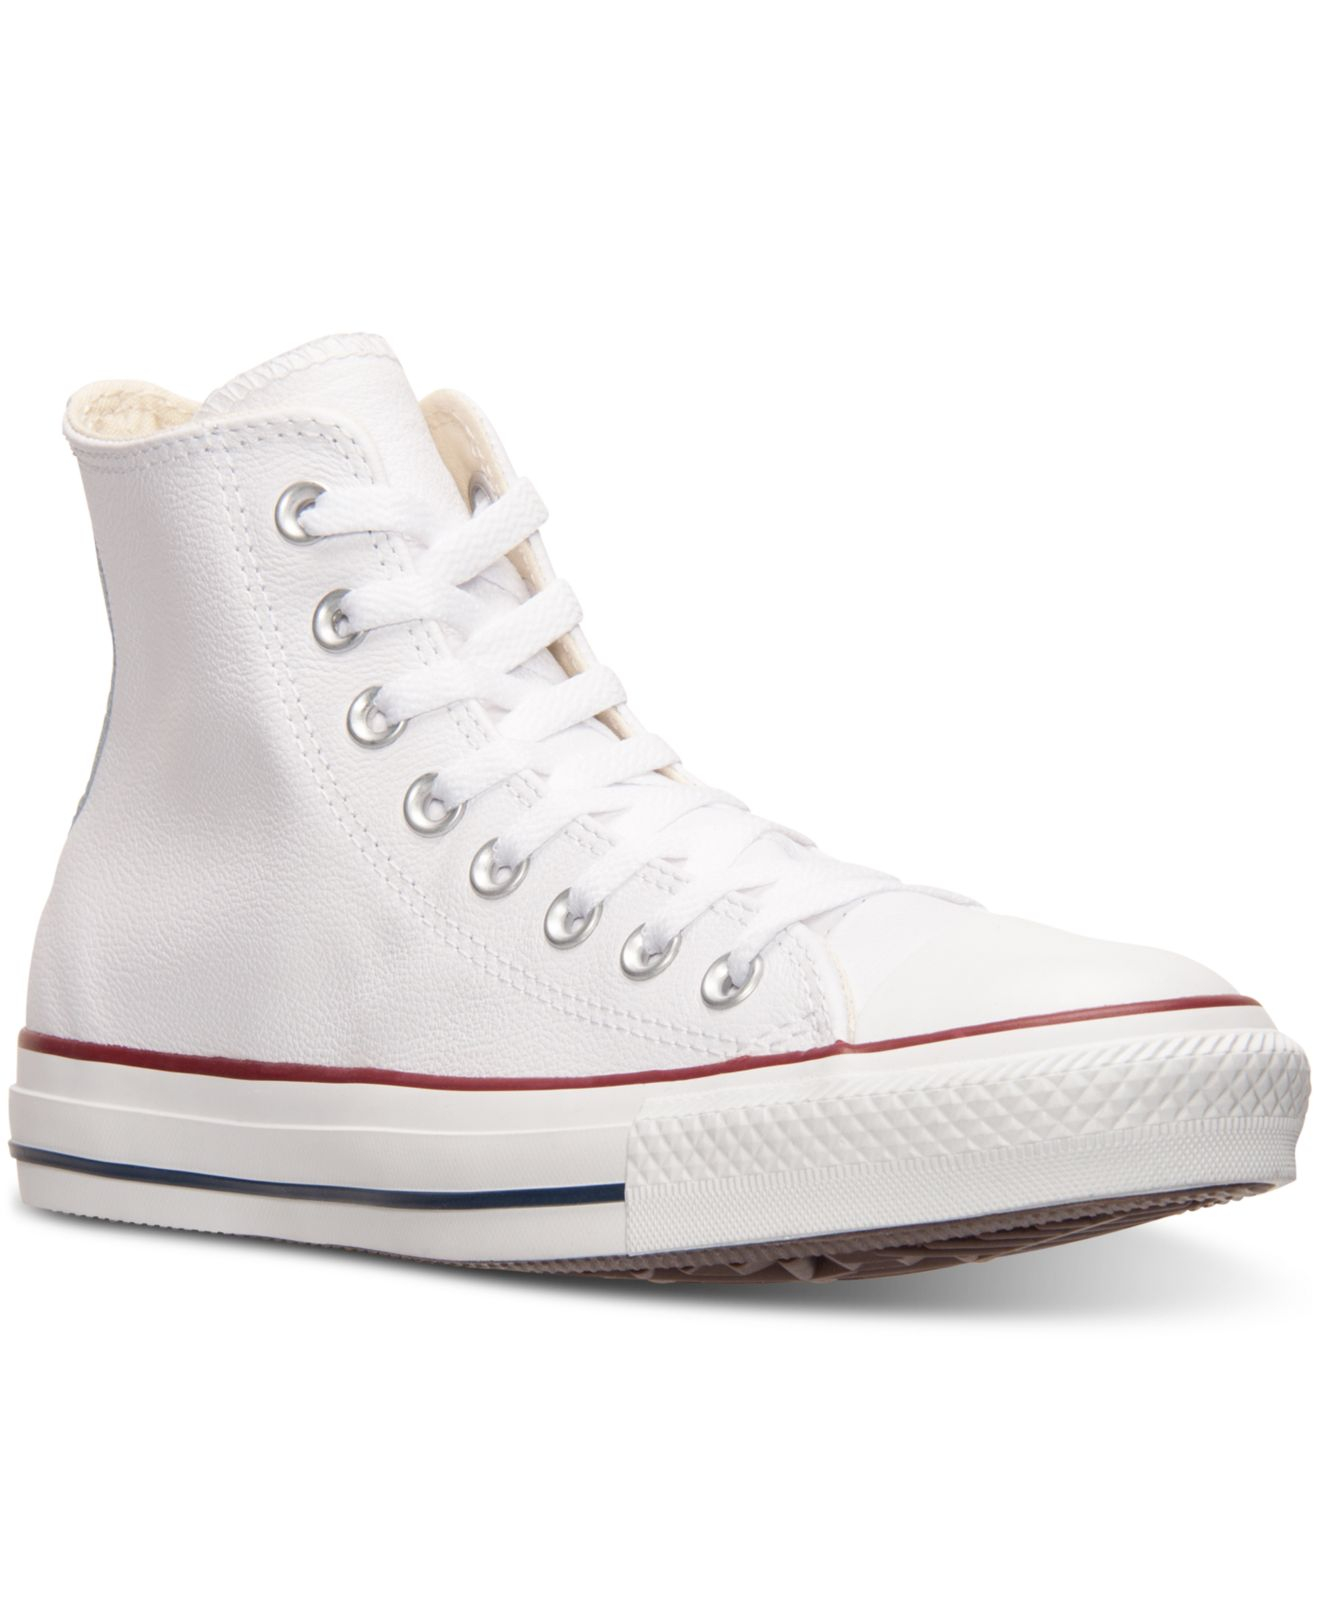 Converse Optic White Mens Chuck Taylor High Leather Casual Sneakers From Finish Line White Product 3 868311186 Normal 